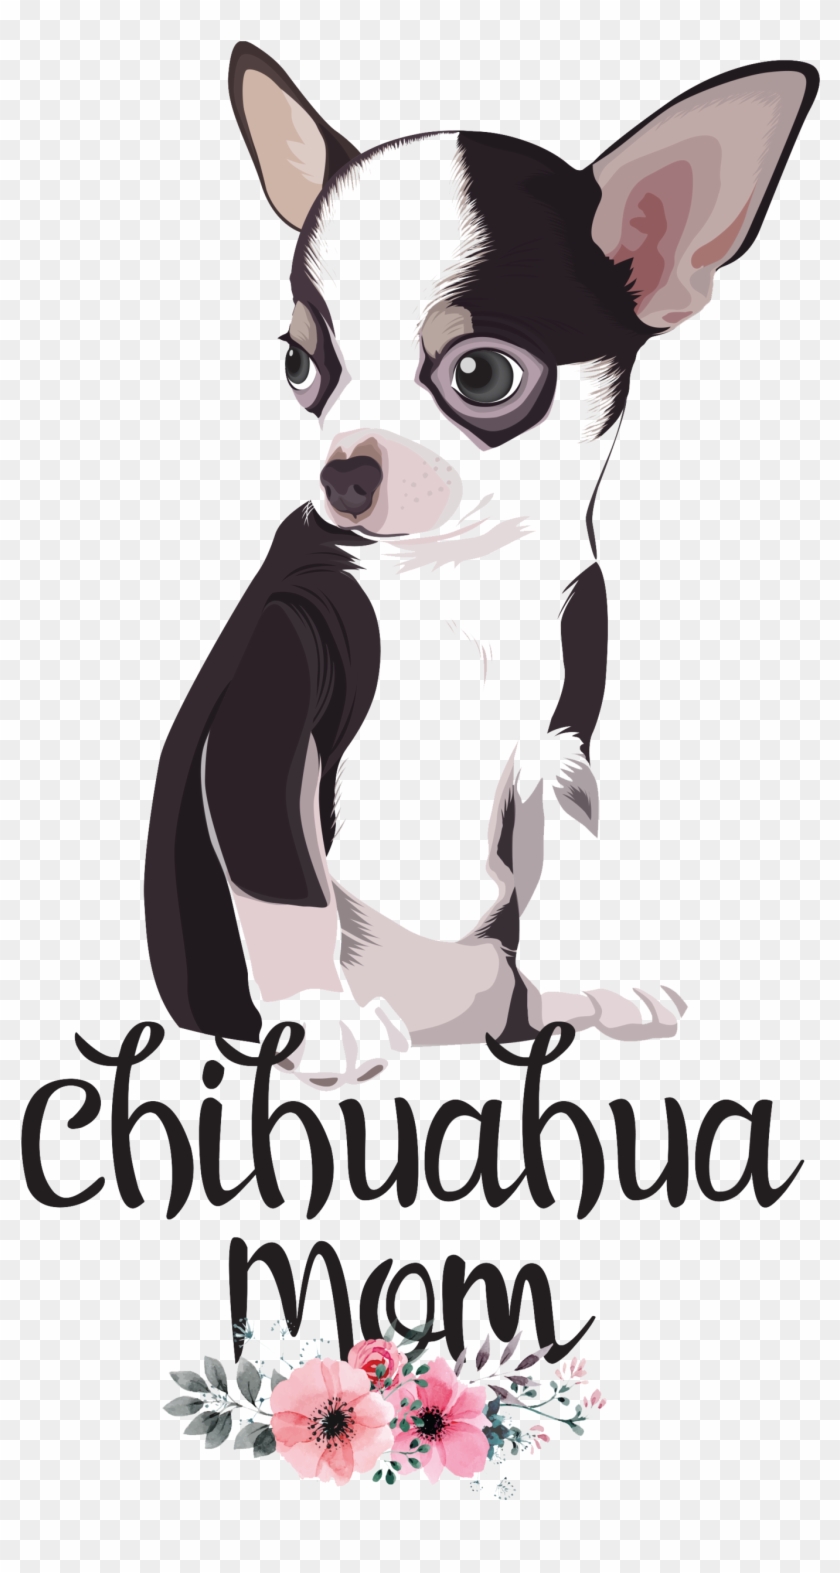 Download Chihuahua Mom Hd Png Download 2500x2500 2367379 Pngfind